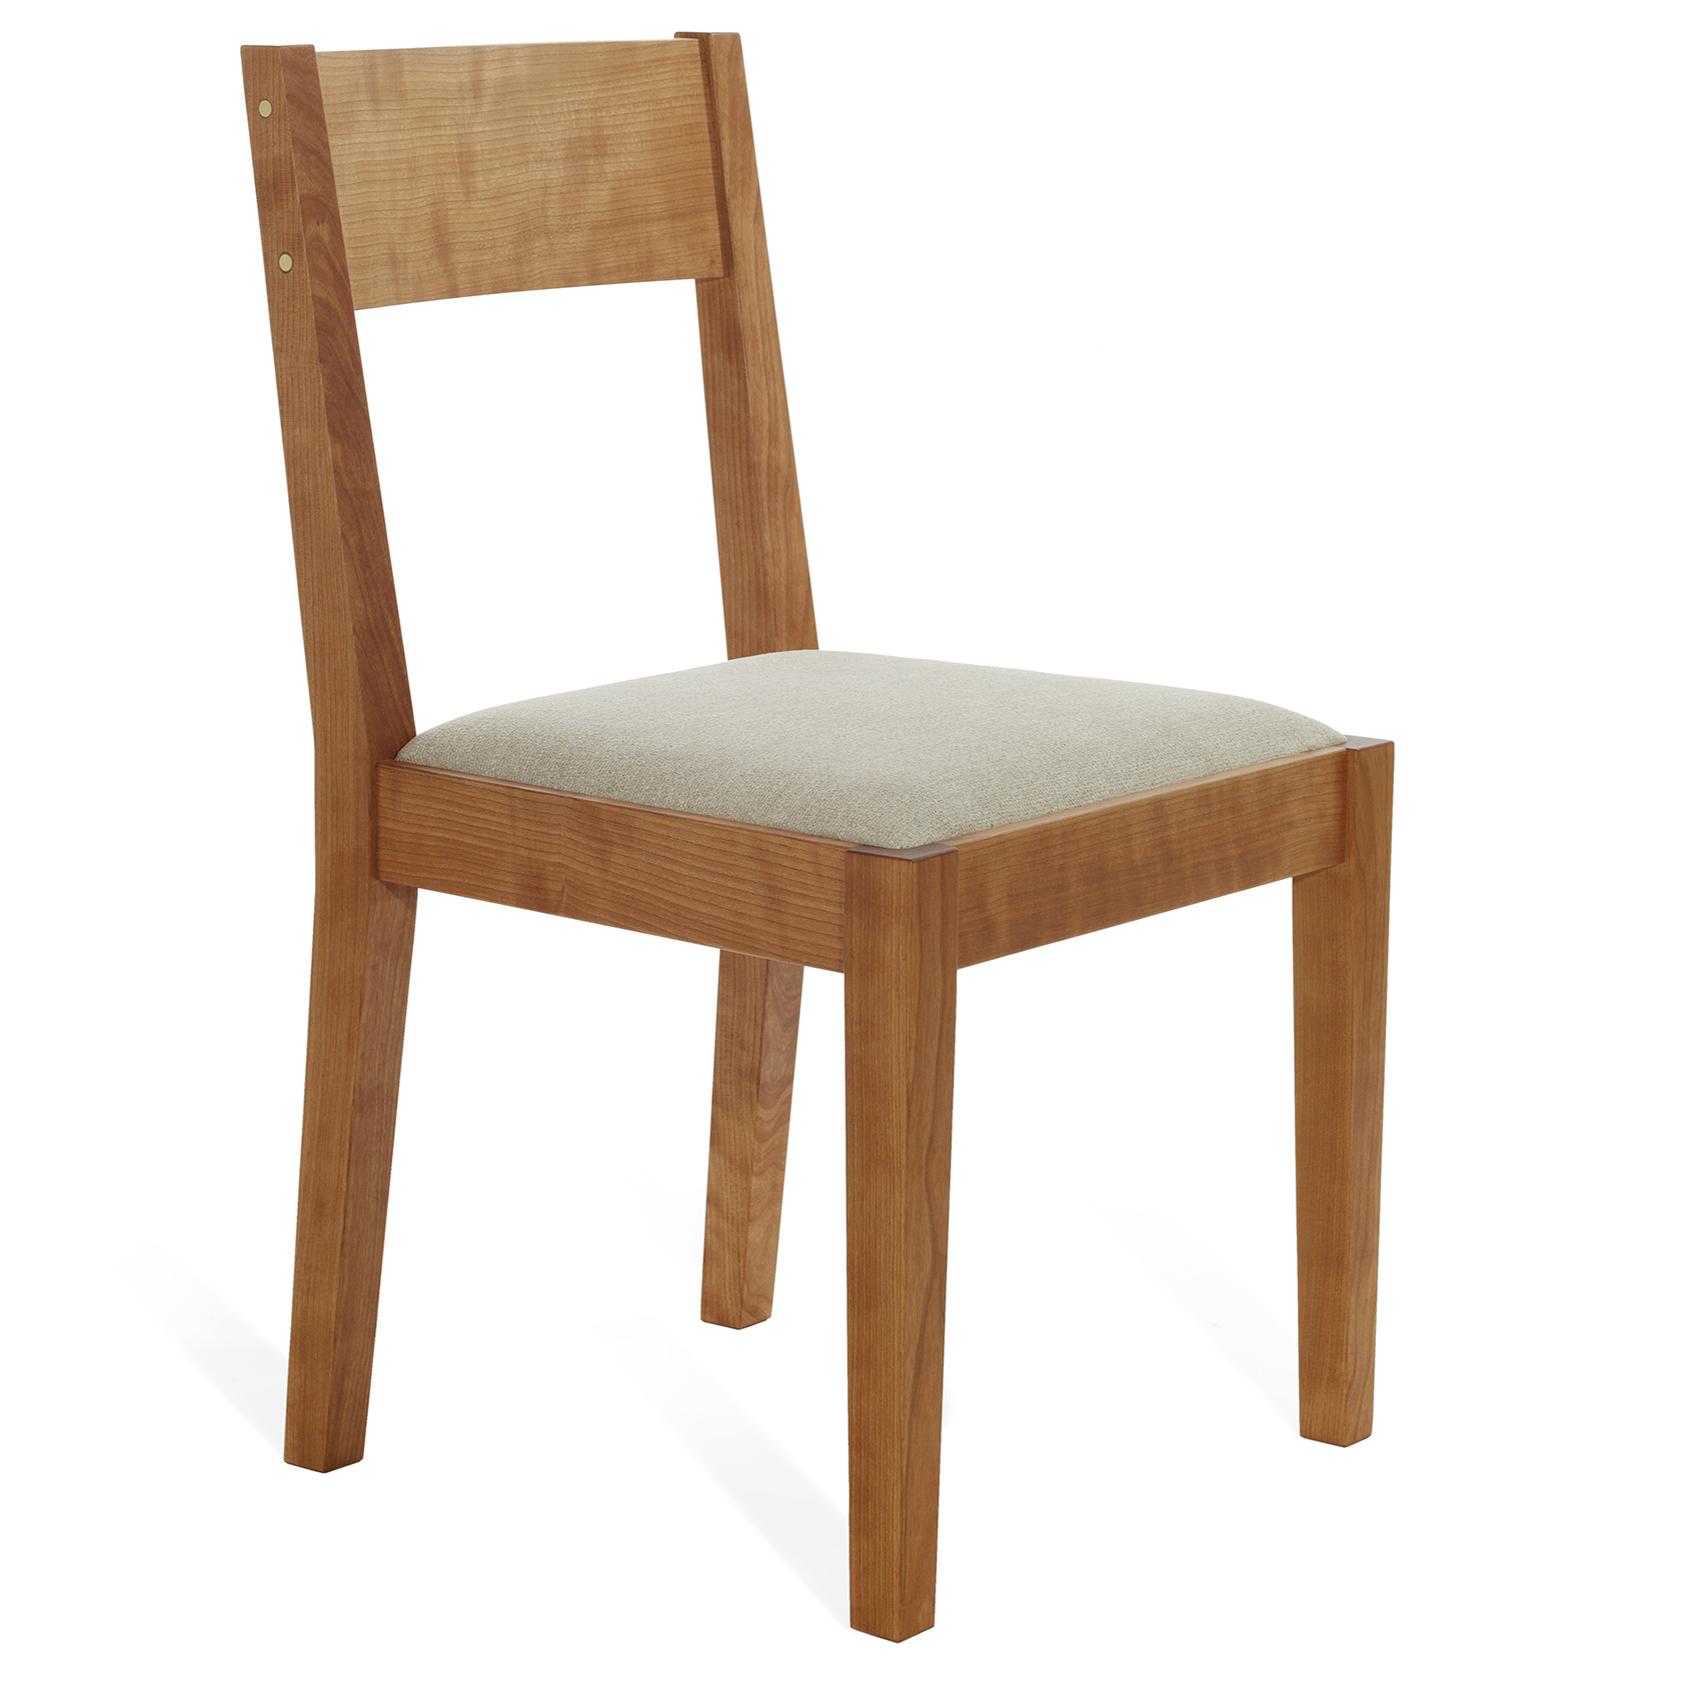 JETMORE CHAIR